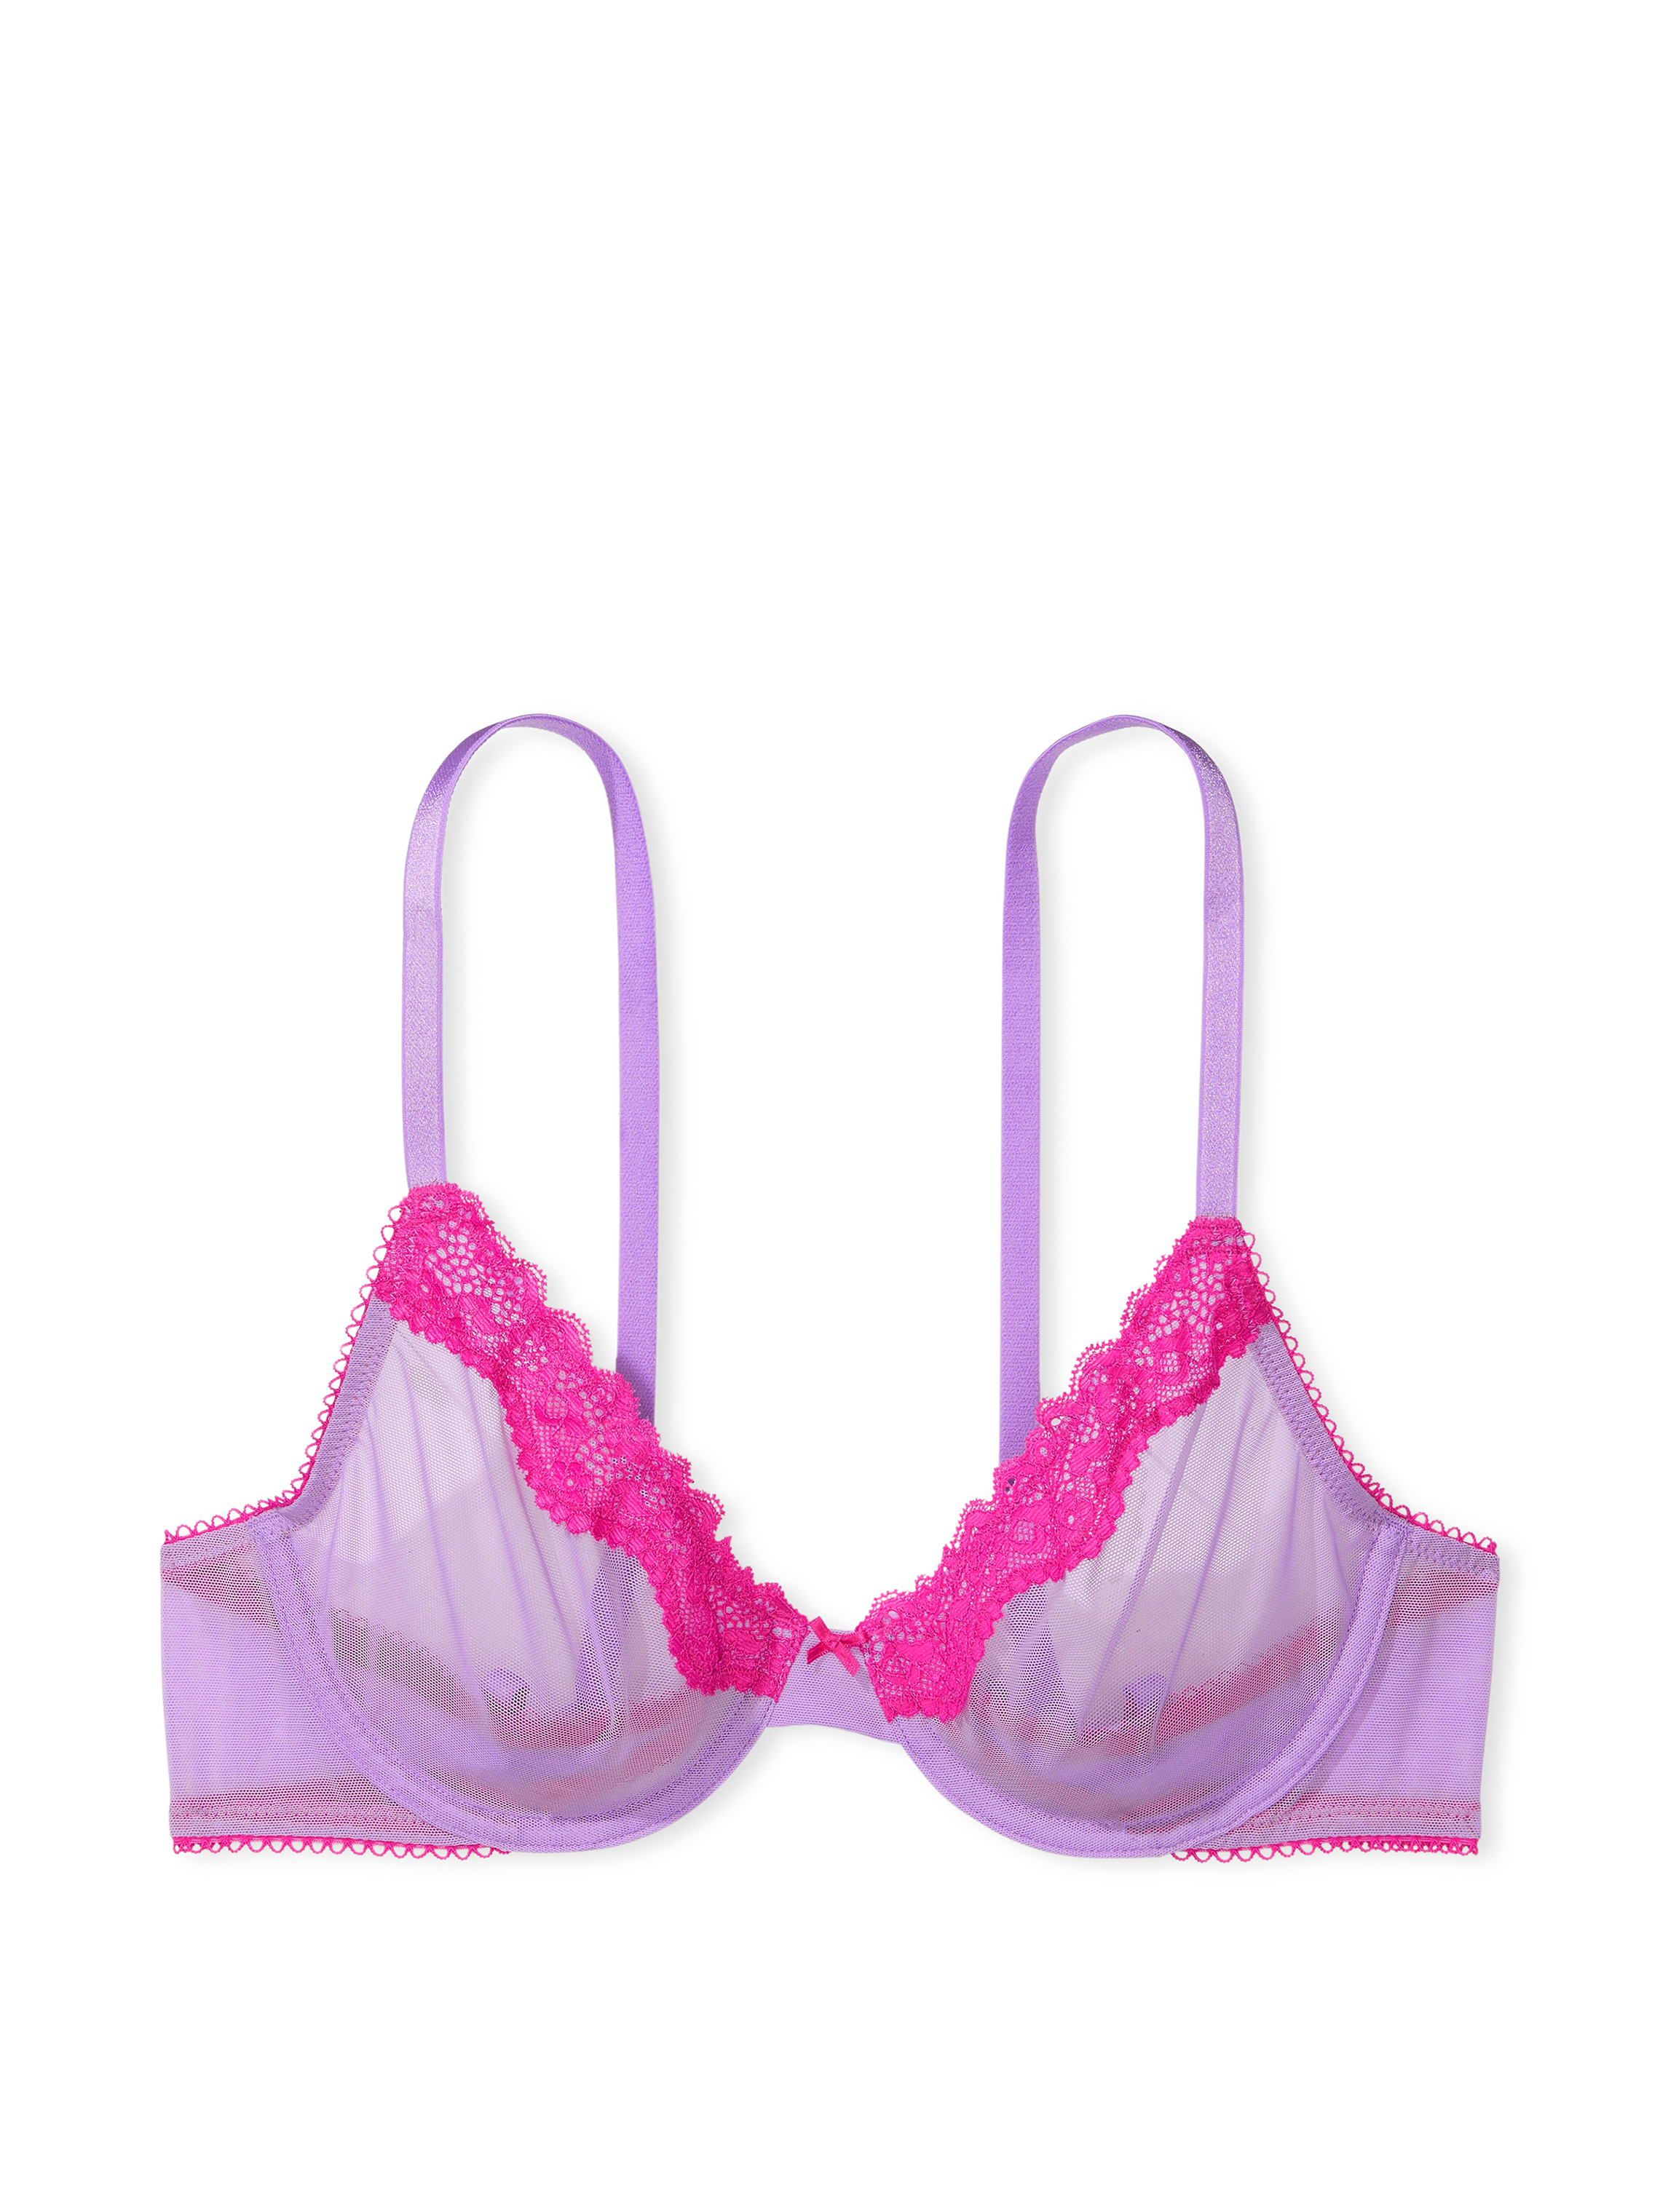 Victoria's Secret on X: Check out our favorite new bras for February 14th!   #XOXOVictoria  / X